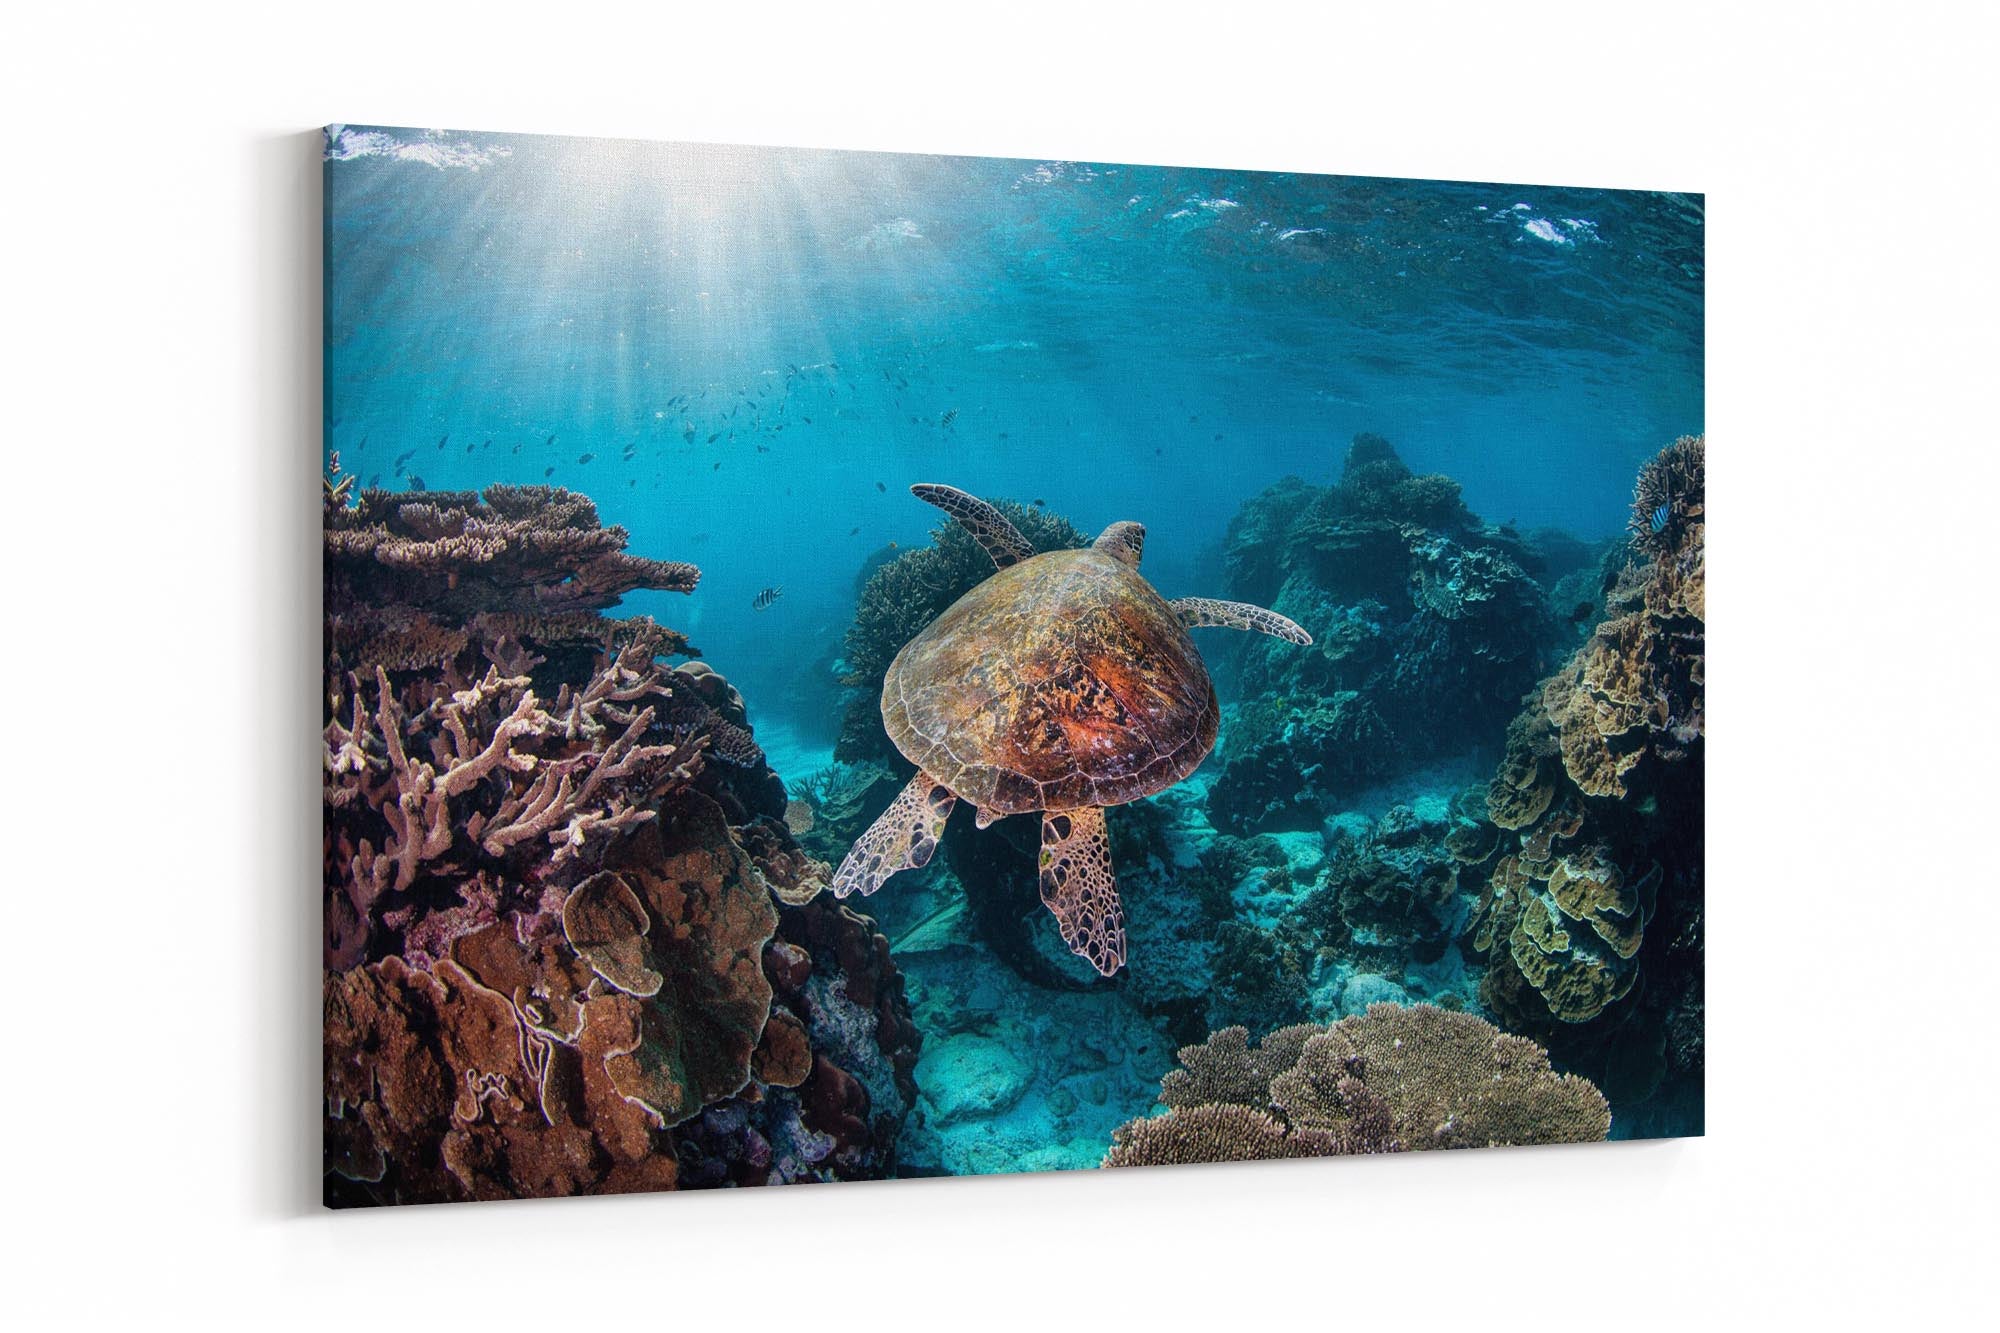 The Turtle Guide | Great Barrier Reef